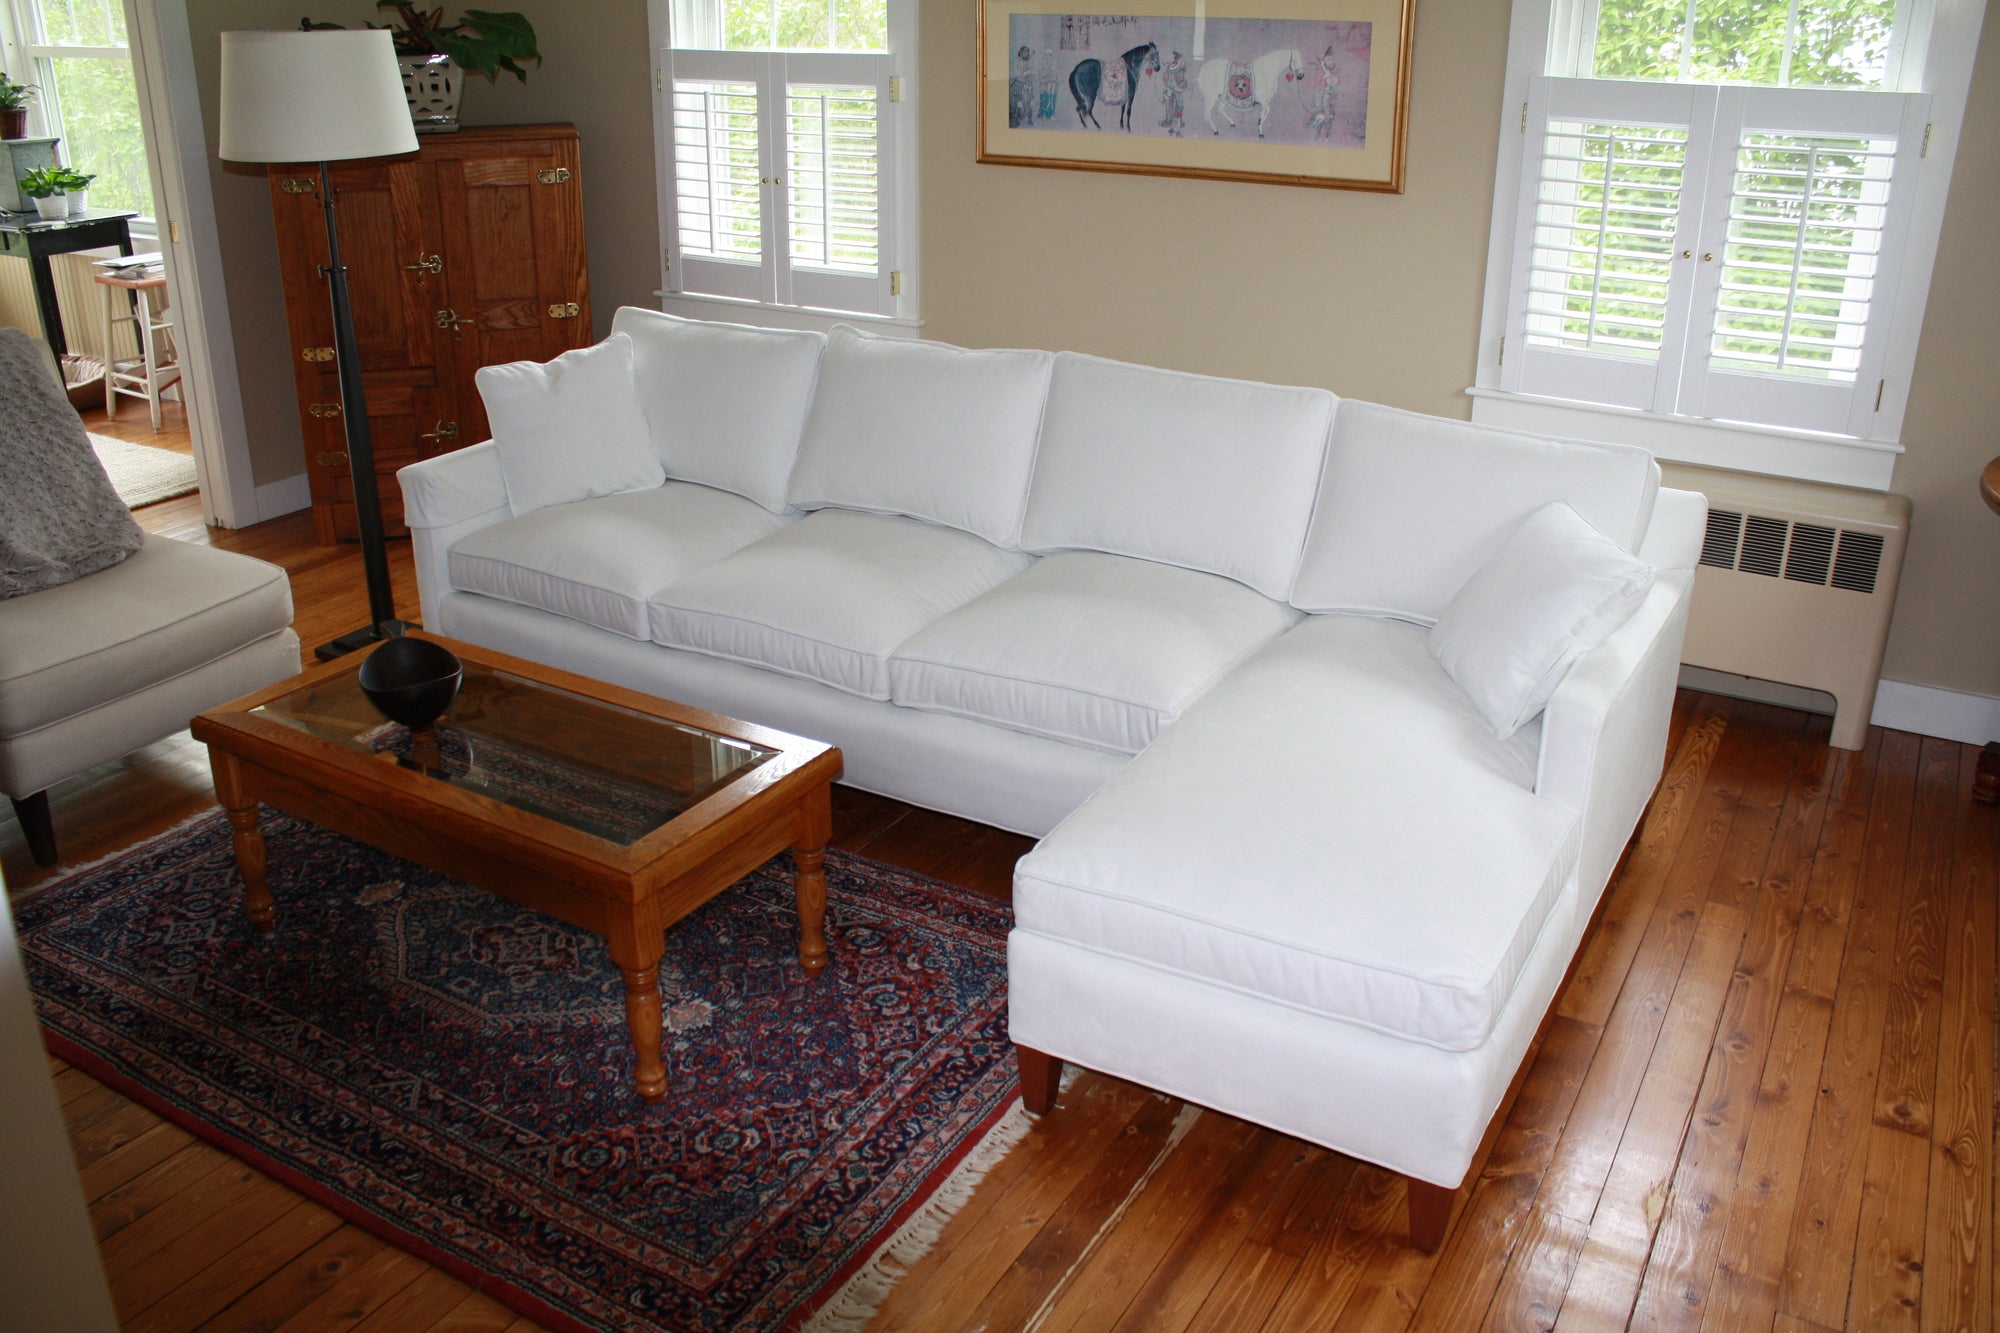 A bright white small sectional sofa